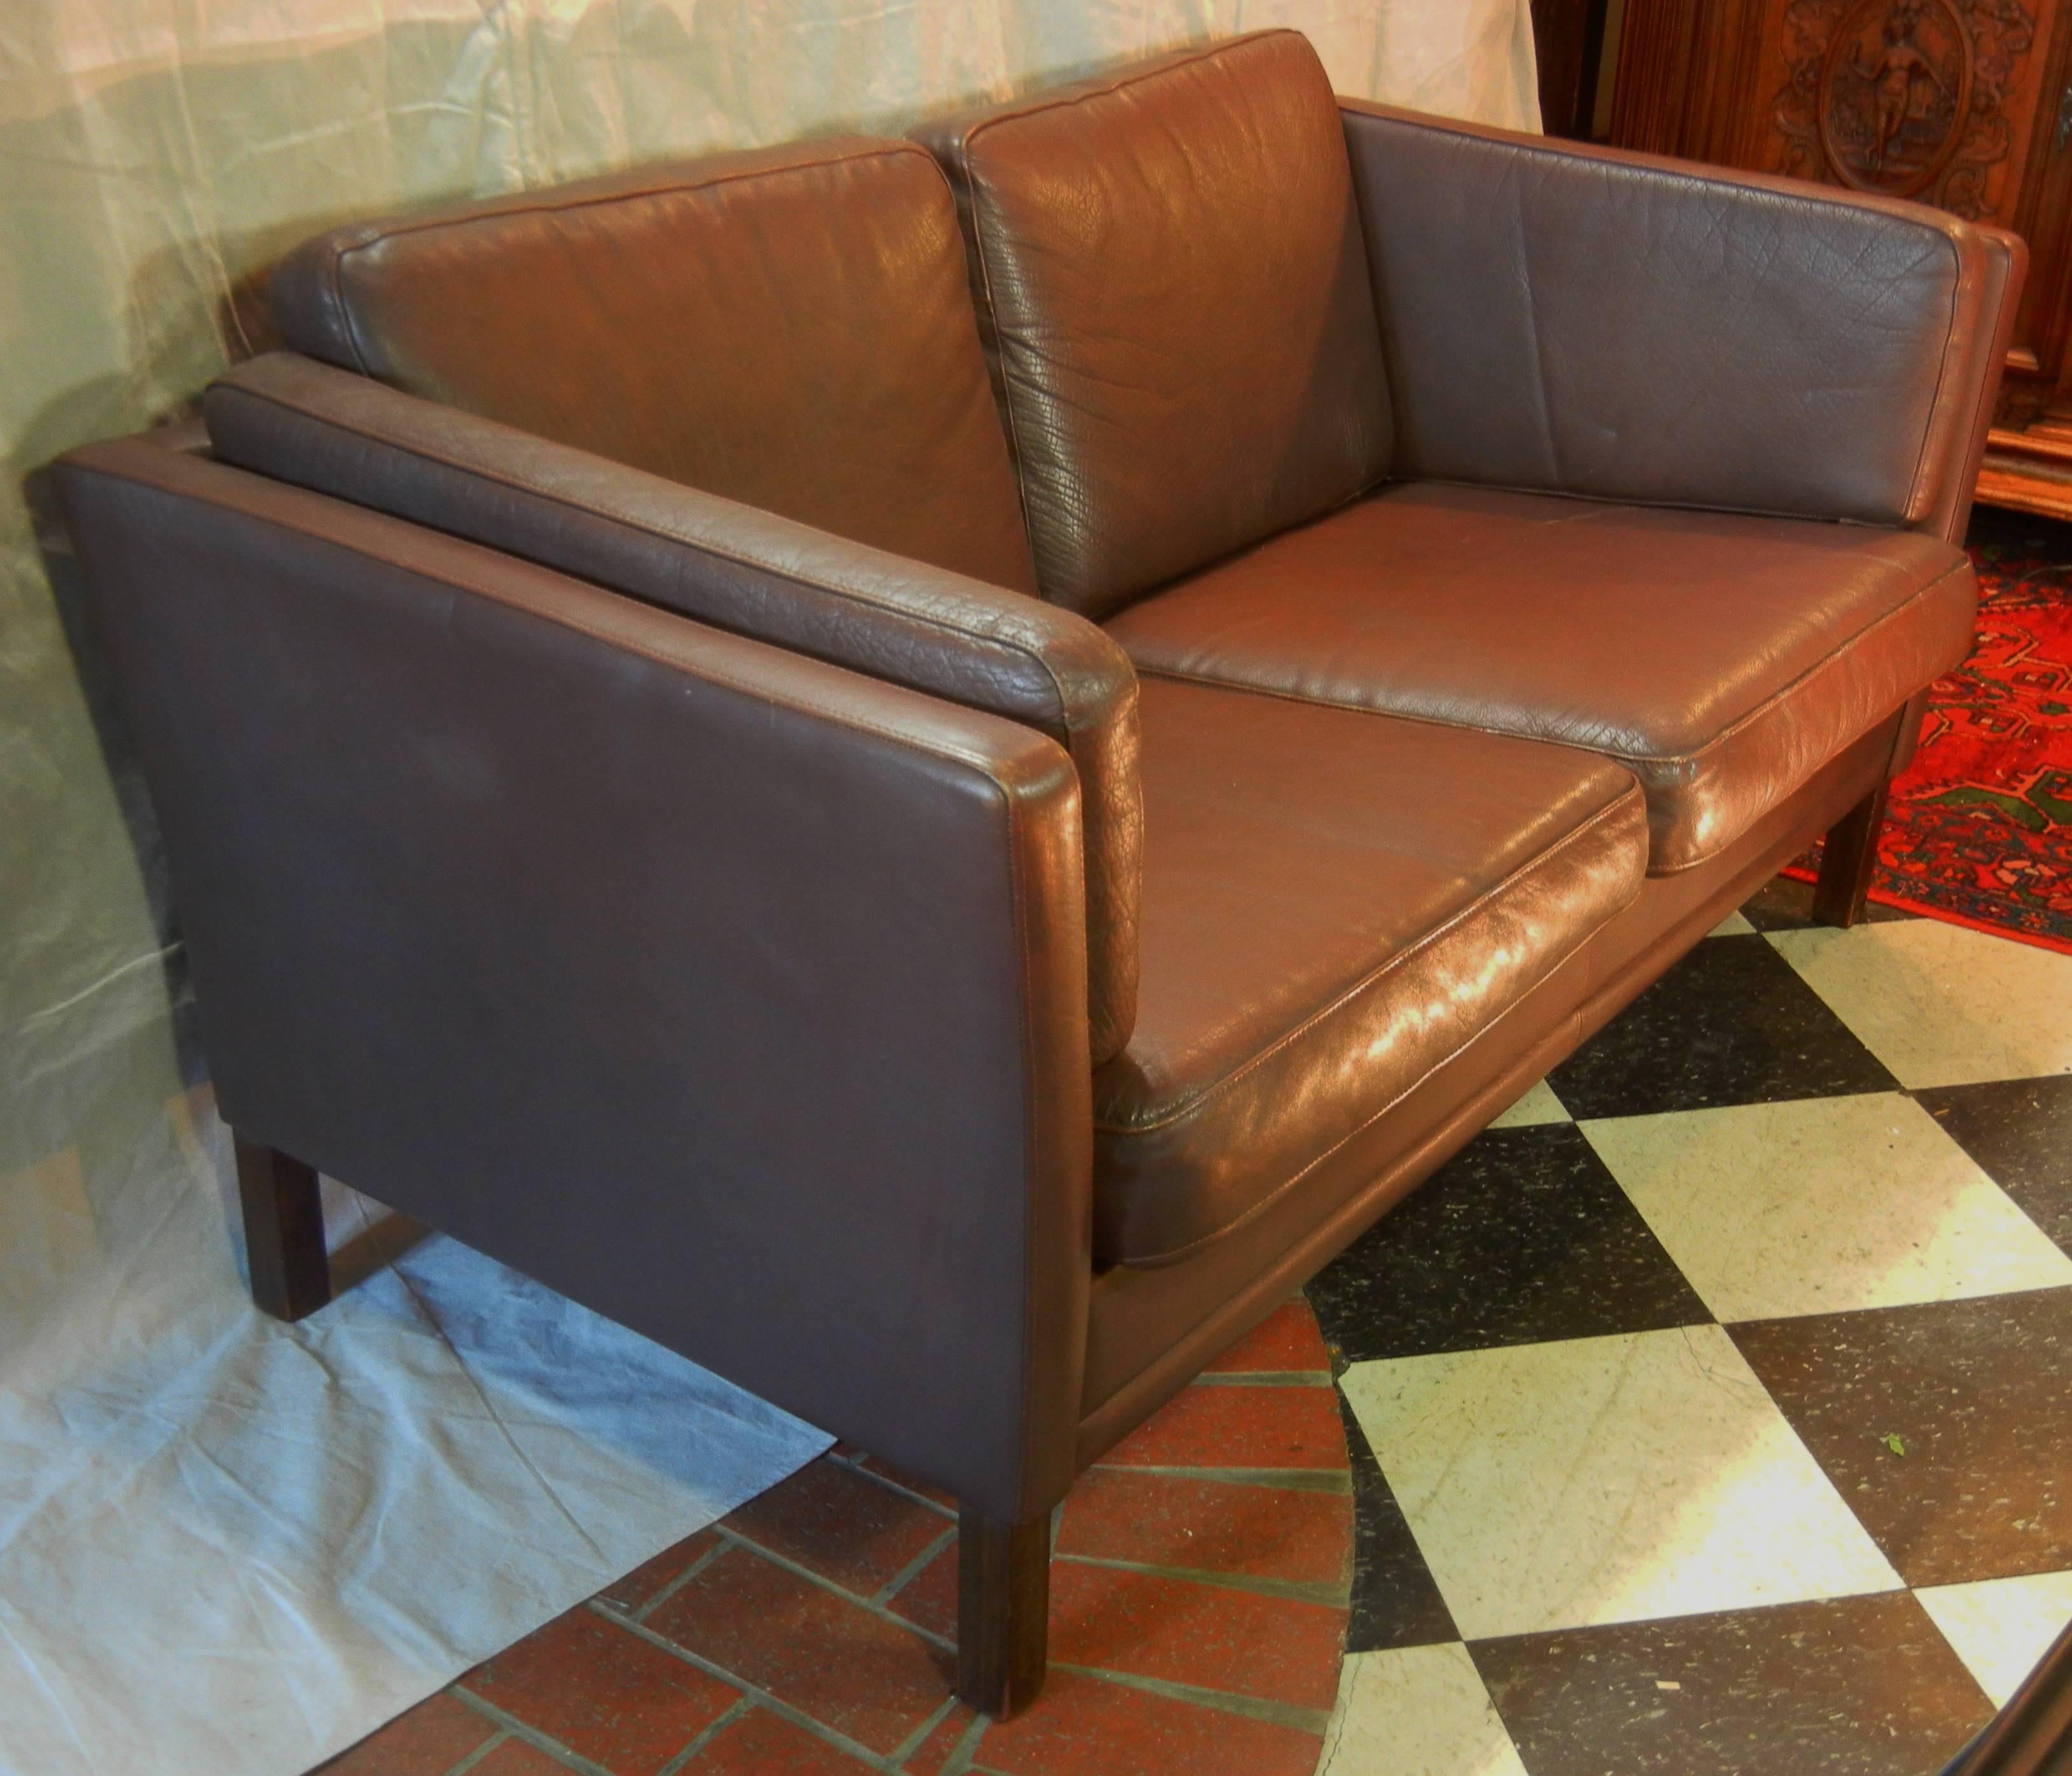 This loveseat or "two-seat sofa," is in the original chocolate brown leather upholstery, it has six loose cushions and it rests on square walnut legs. There is a slight outward lean to the sides which gives a comforting feeling of Good